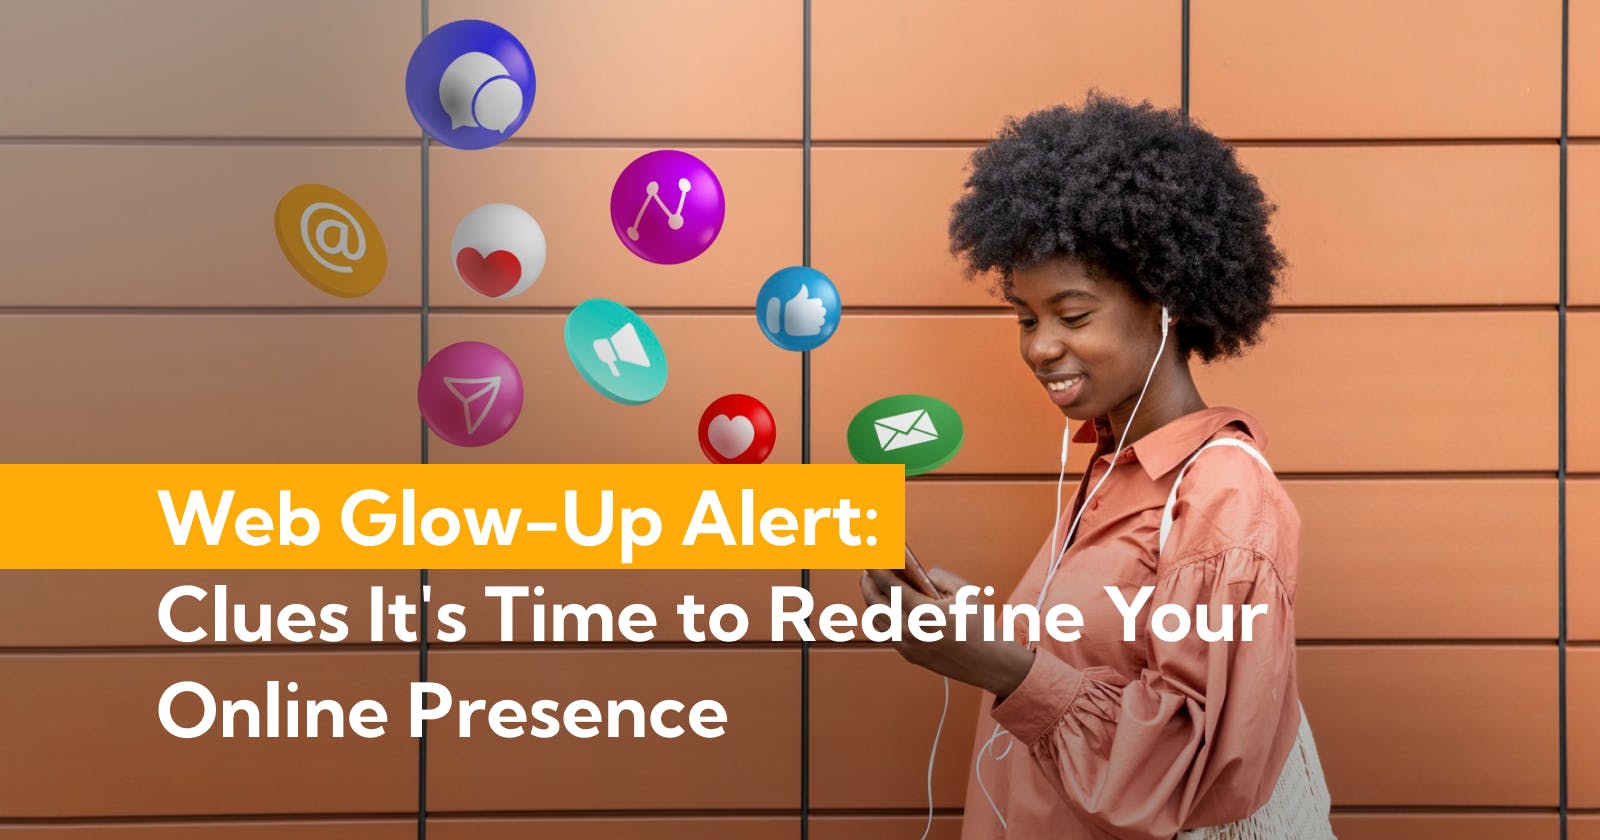 Web Glow-Up Alert: Clues It's Time to Redefine Your Online Presence